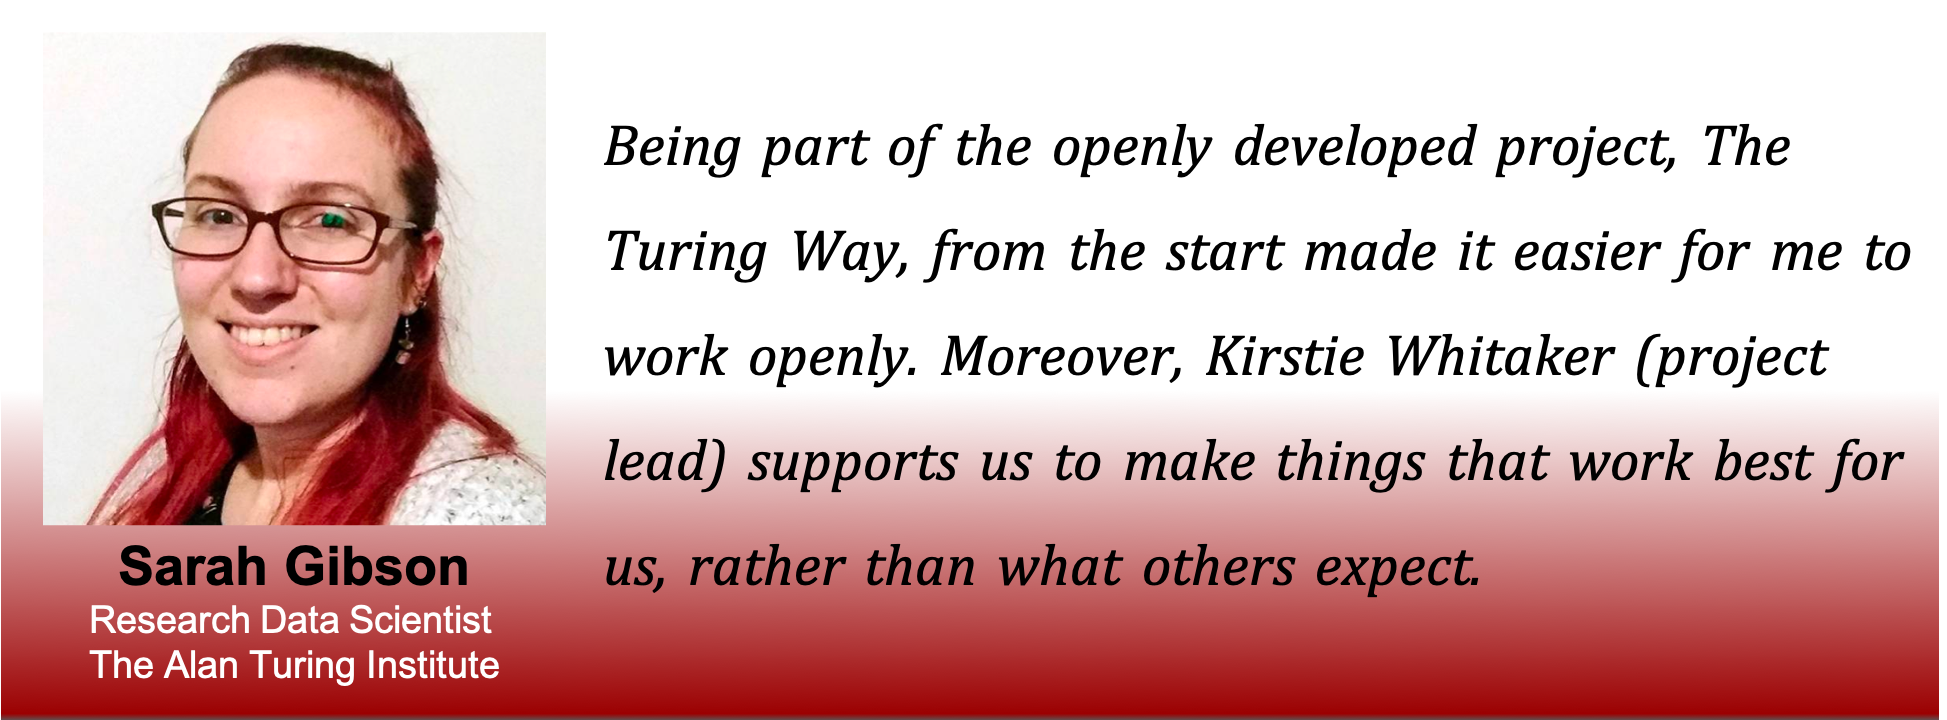 Picture of Sarah with the caption: being part of the openly developed project, The Turing Way, from the start made it easier for me to work openly. Moreover, Kirstie Whitaker (project lead) supports us to make things that work best for us, rather than what others expect.